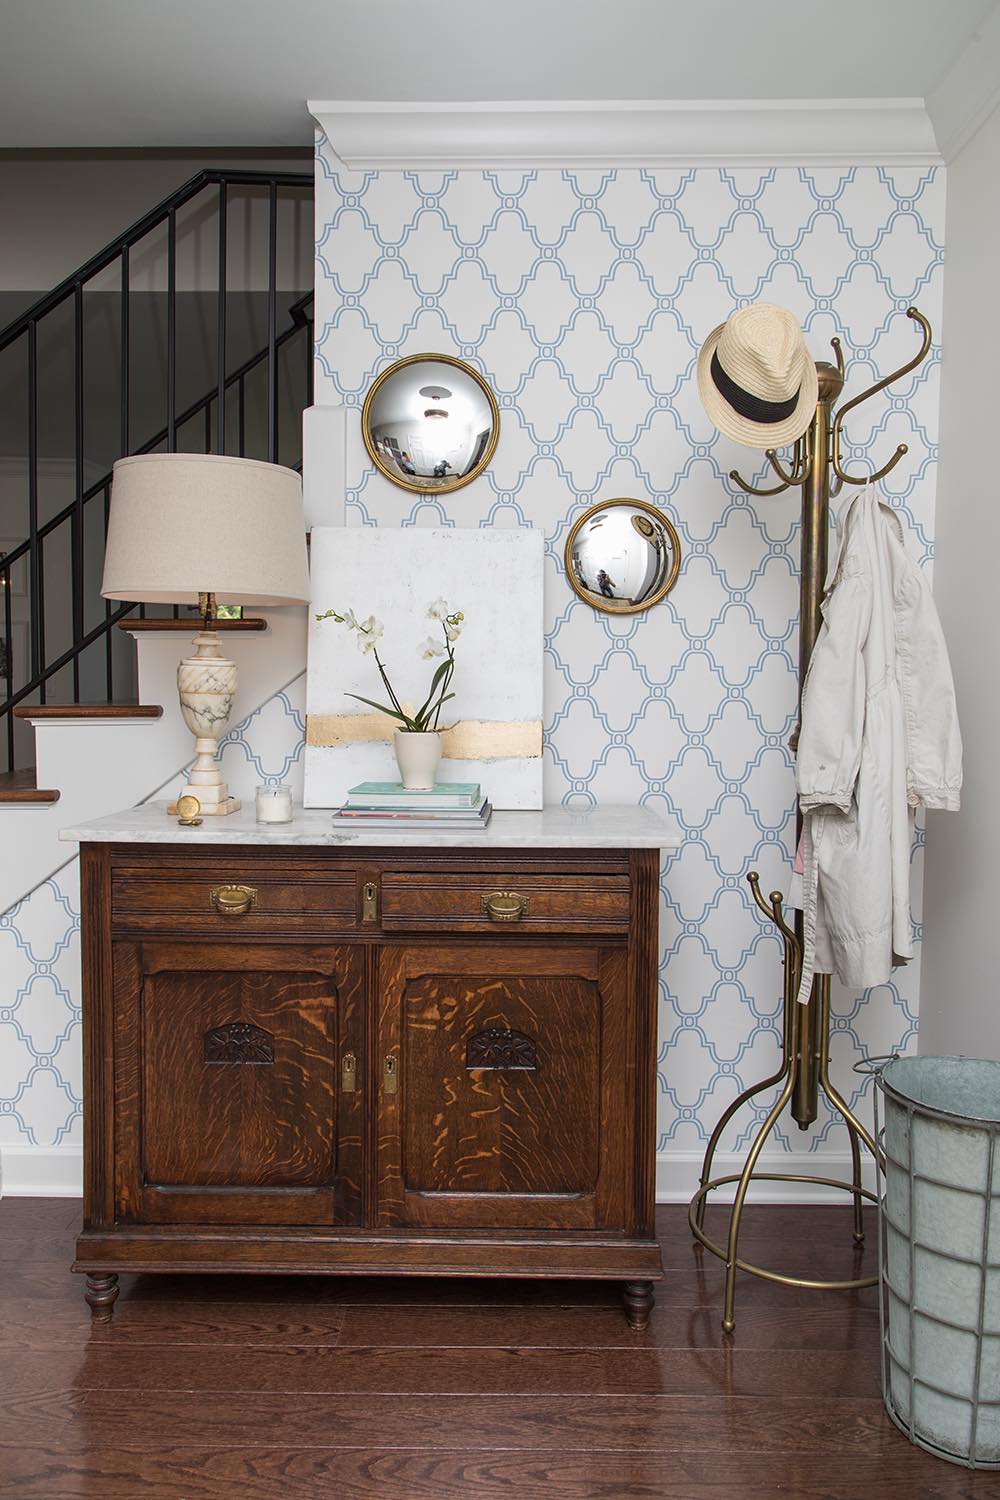 Beautiful entryway set up at the base of a set of stairs with an antique wooden floor cabinet topped with a classic lamp, a stack of books, a potted orchid and a white and gold art canvas, in front of a wall covered in blue and white geometric wallpaper and two circular convex mirrors, and a coat rack with a straw hat and white coat hanging of it